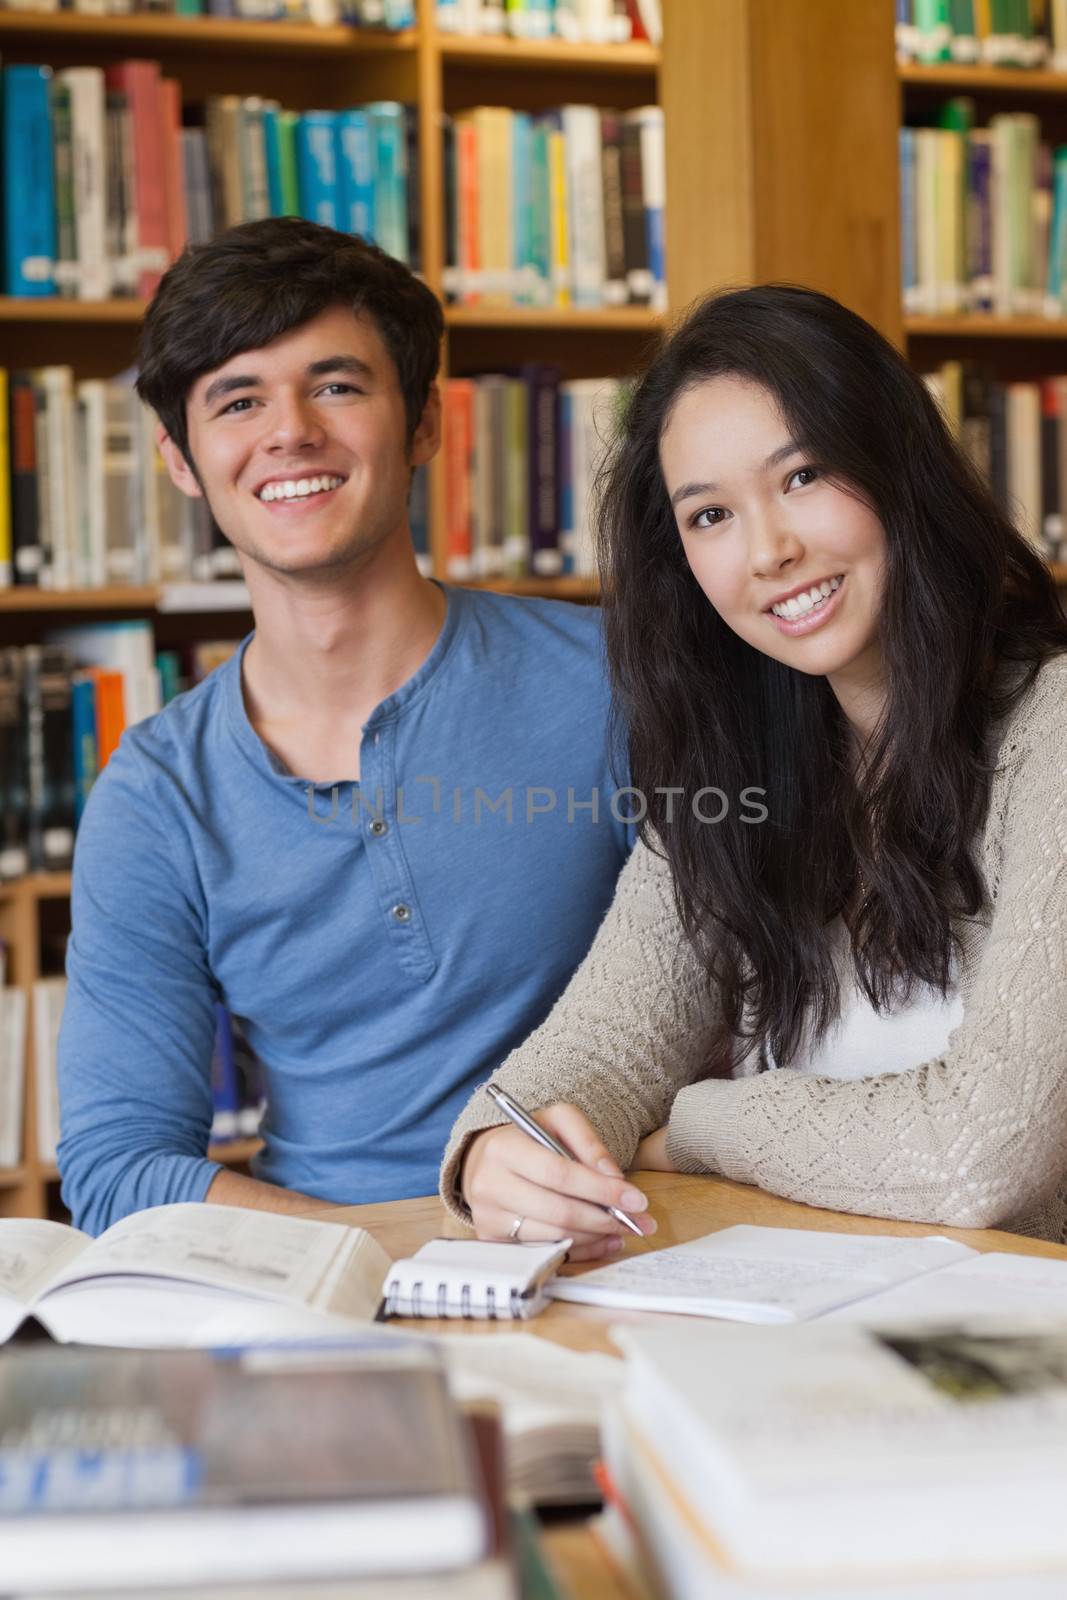 Two people sitting in a library at a desk and learning while smiling